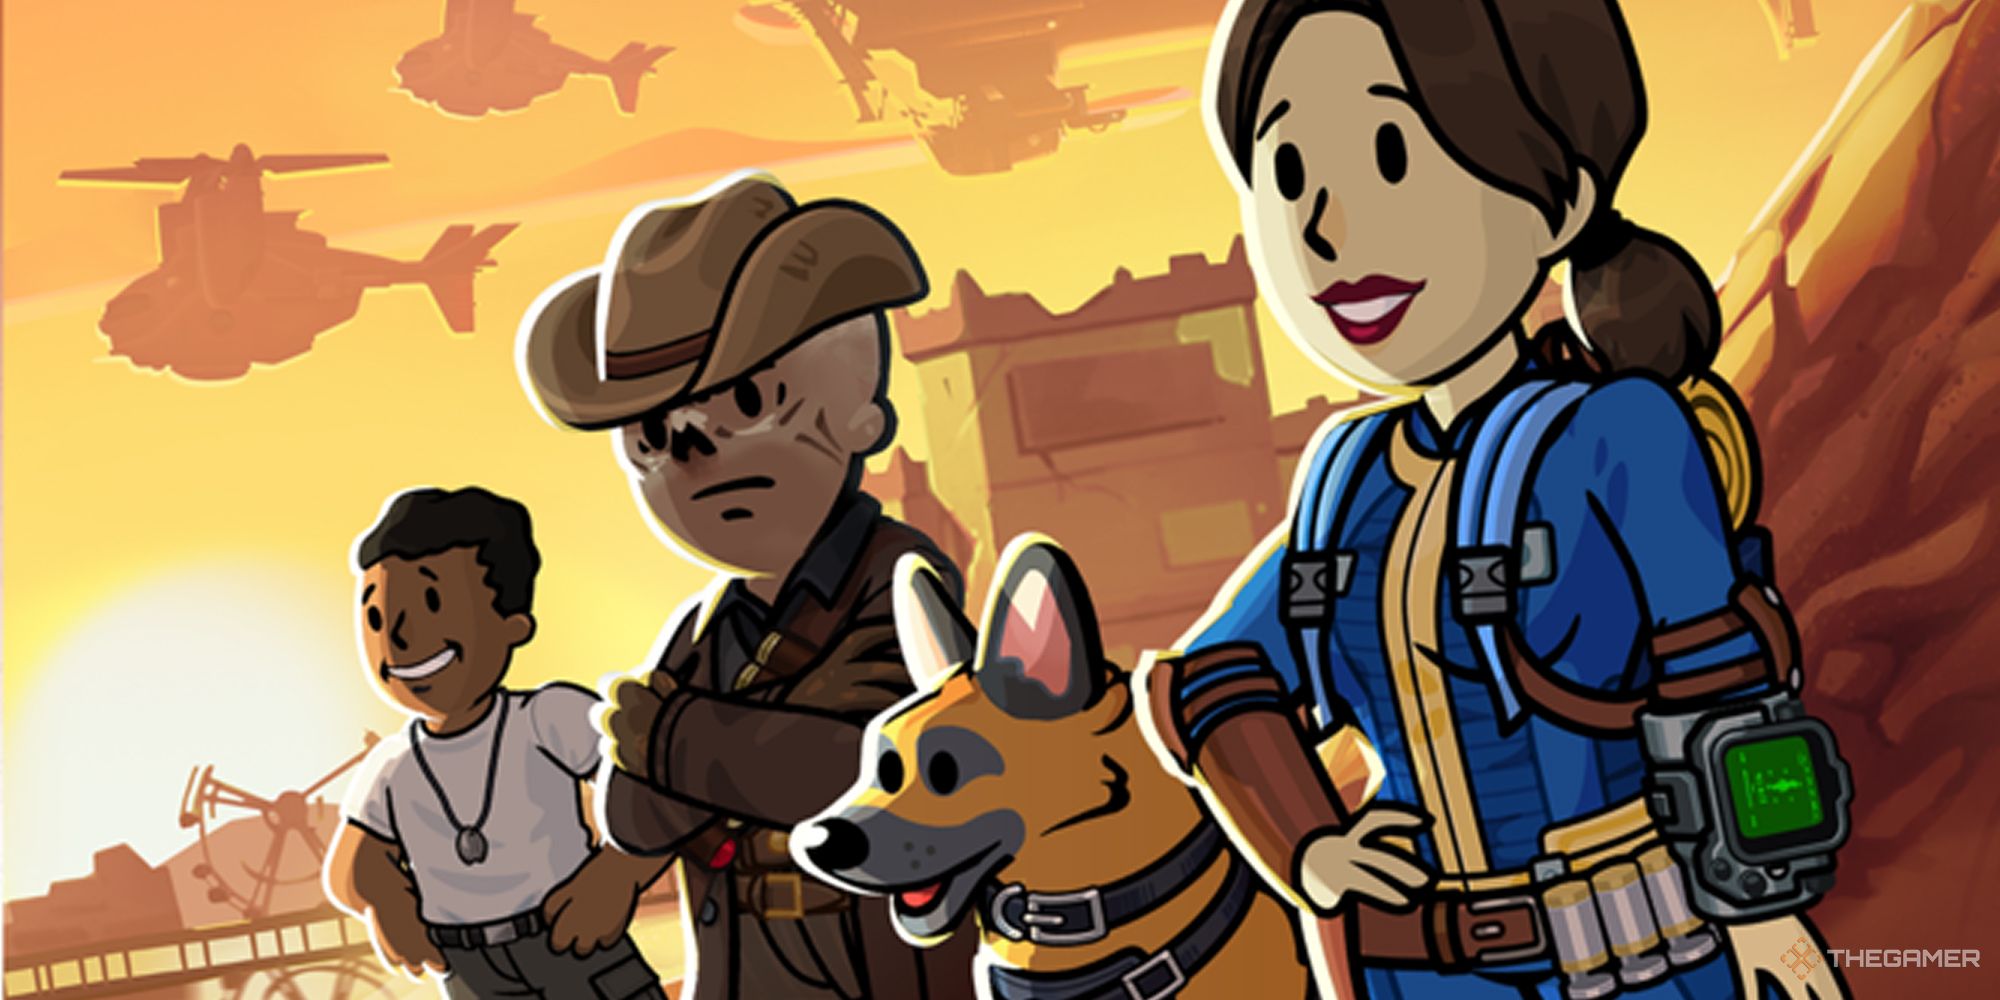 Fallout Shelter Legendary Dwellers from the show